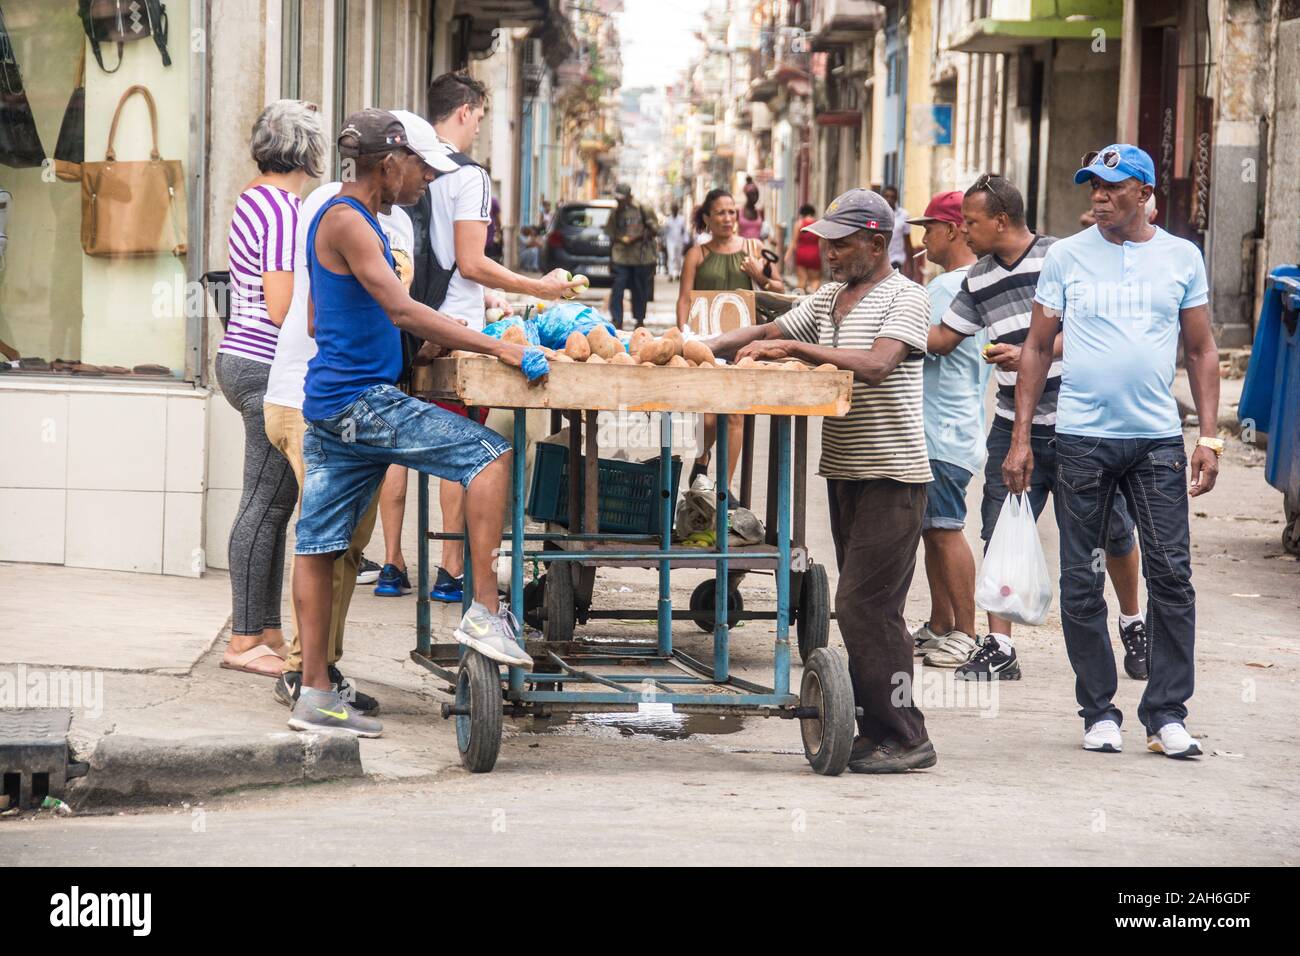 People of Havana Series - A mixed group of Cubans gather around a fruit and vegetable vender to buy food. Stock Photo